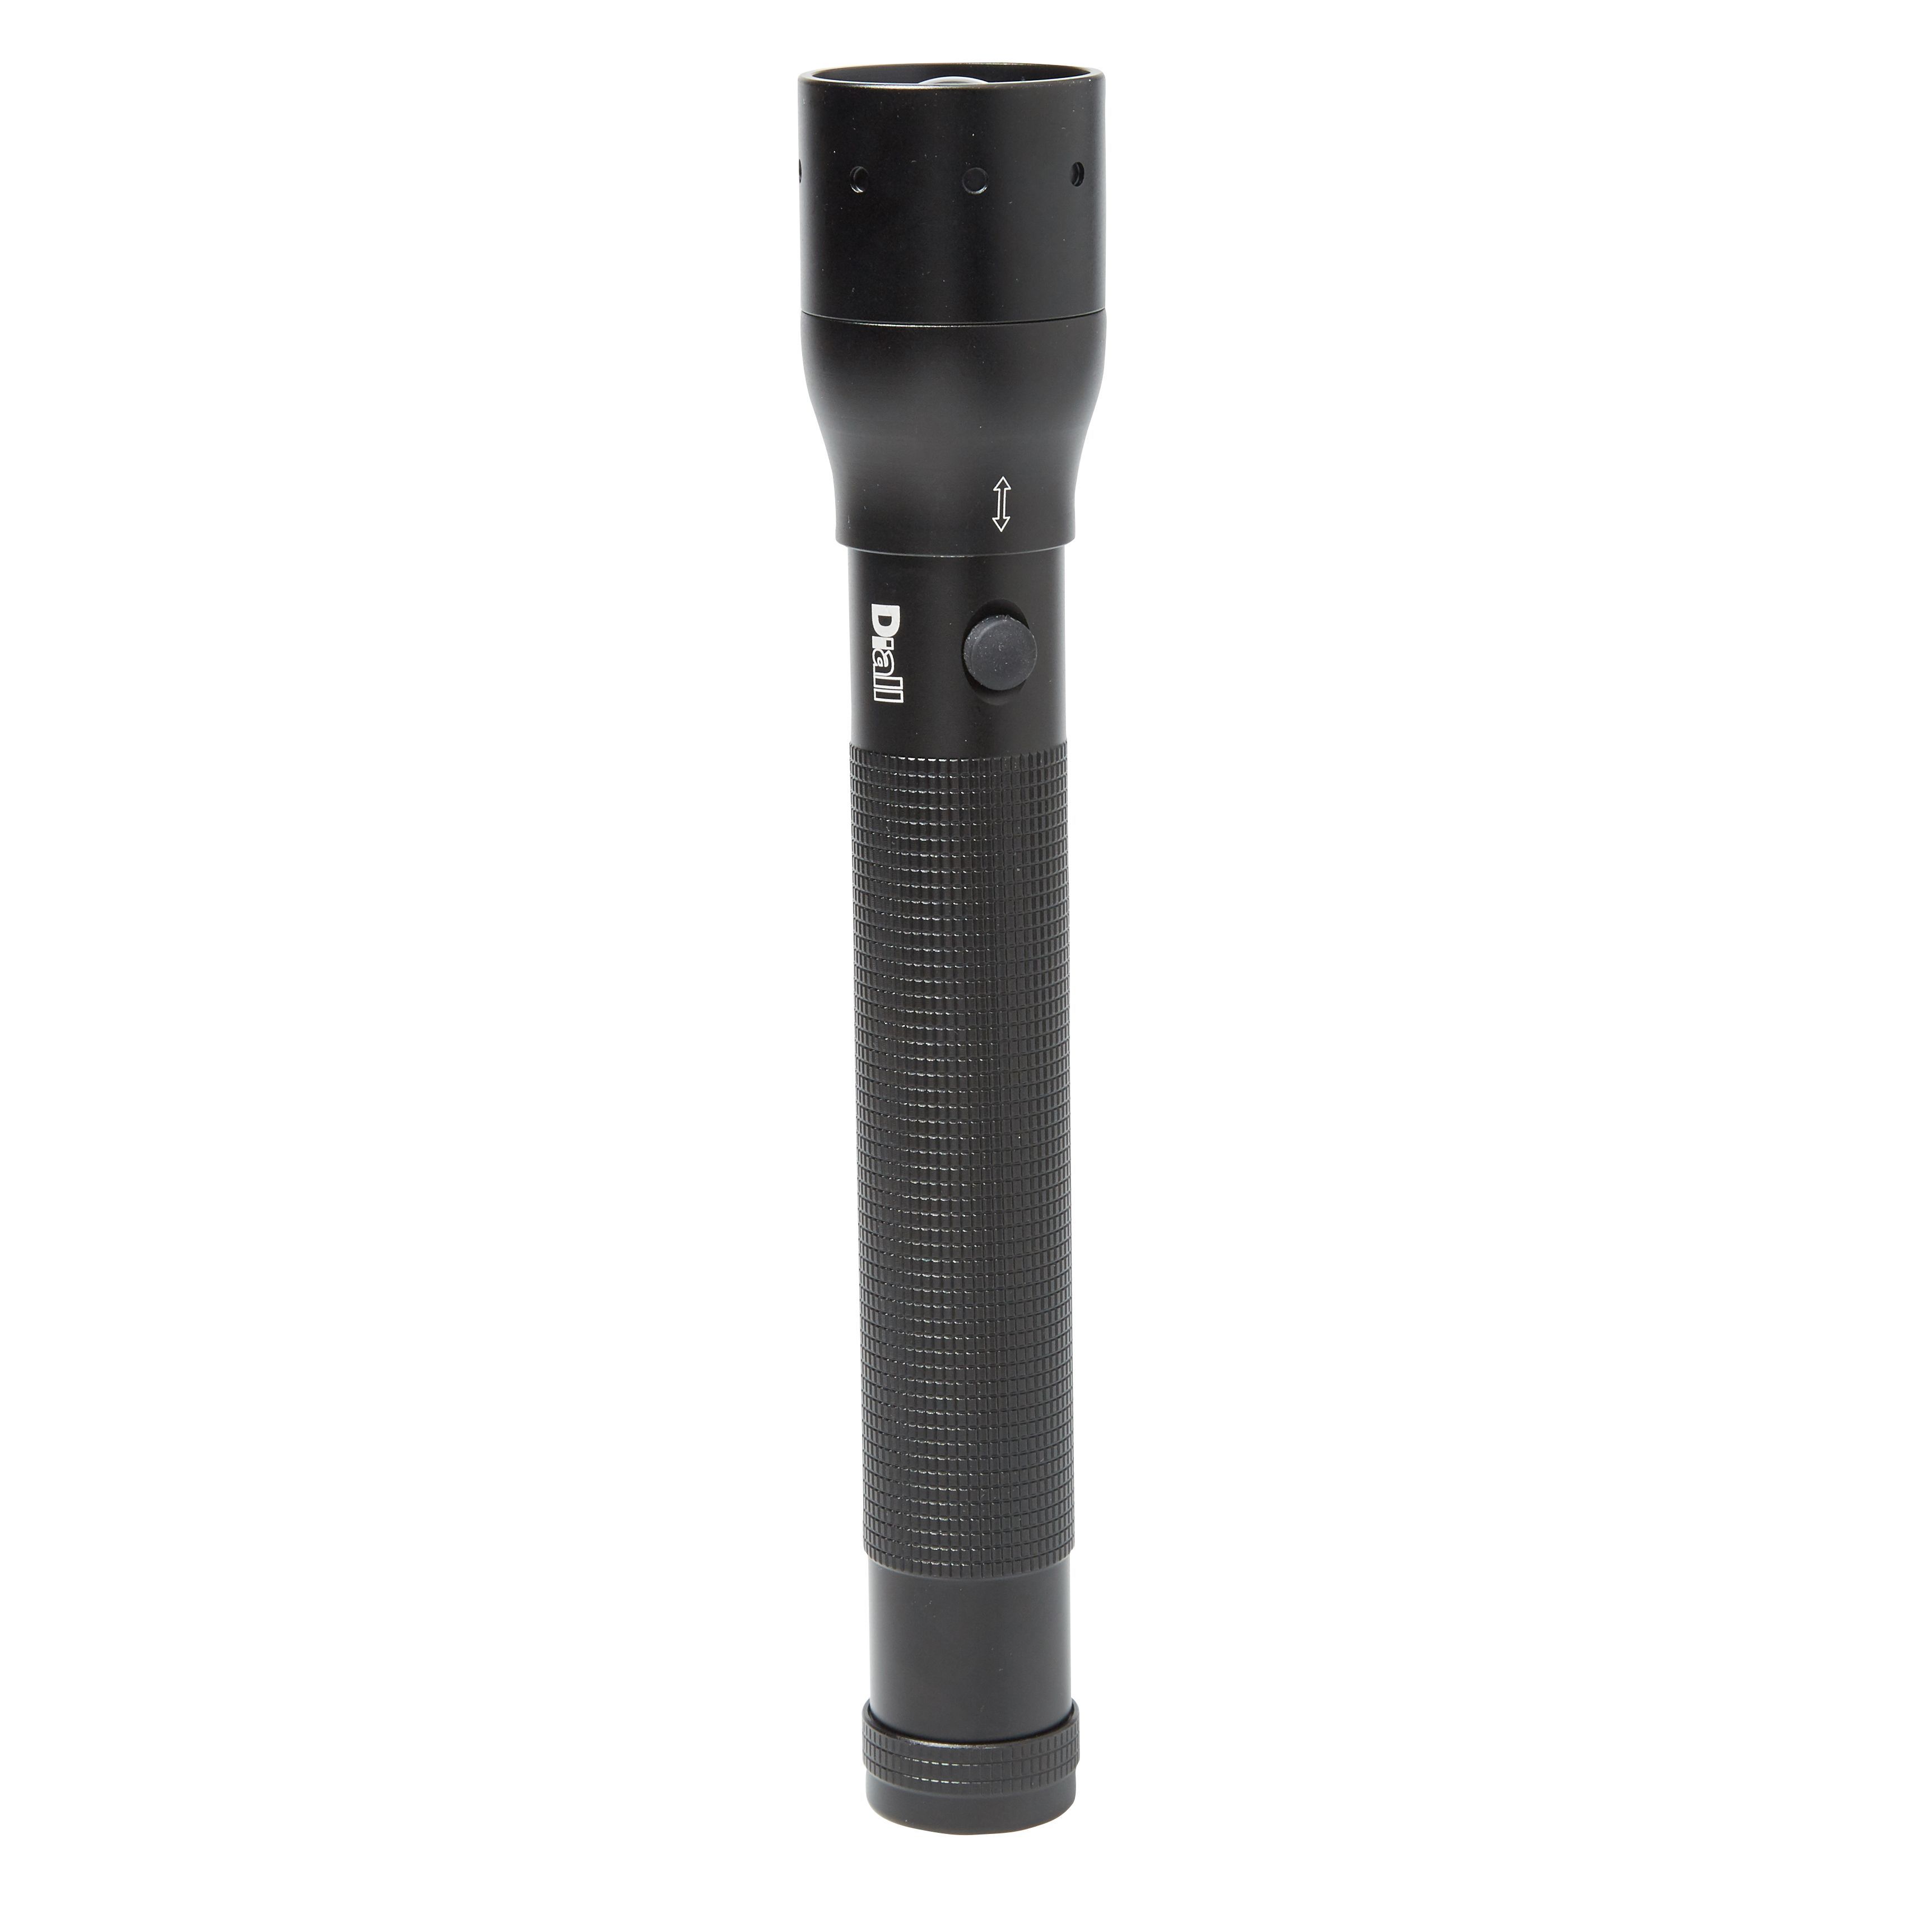 Diall Pro LED Torch